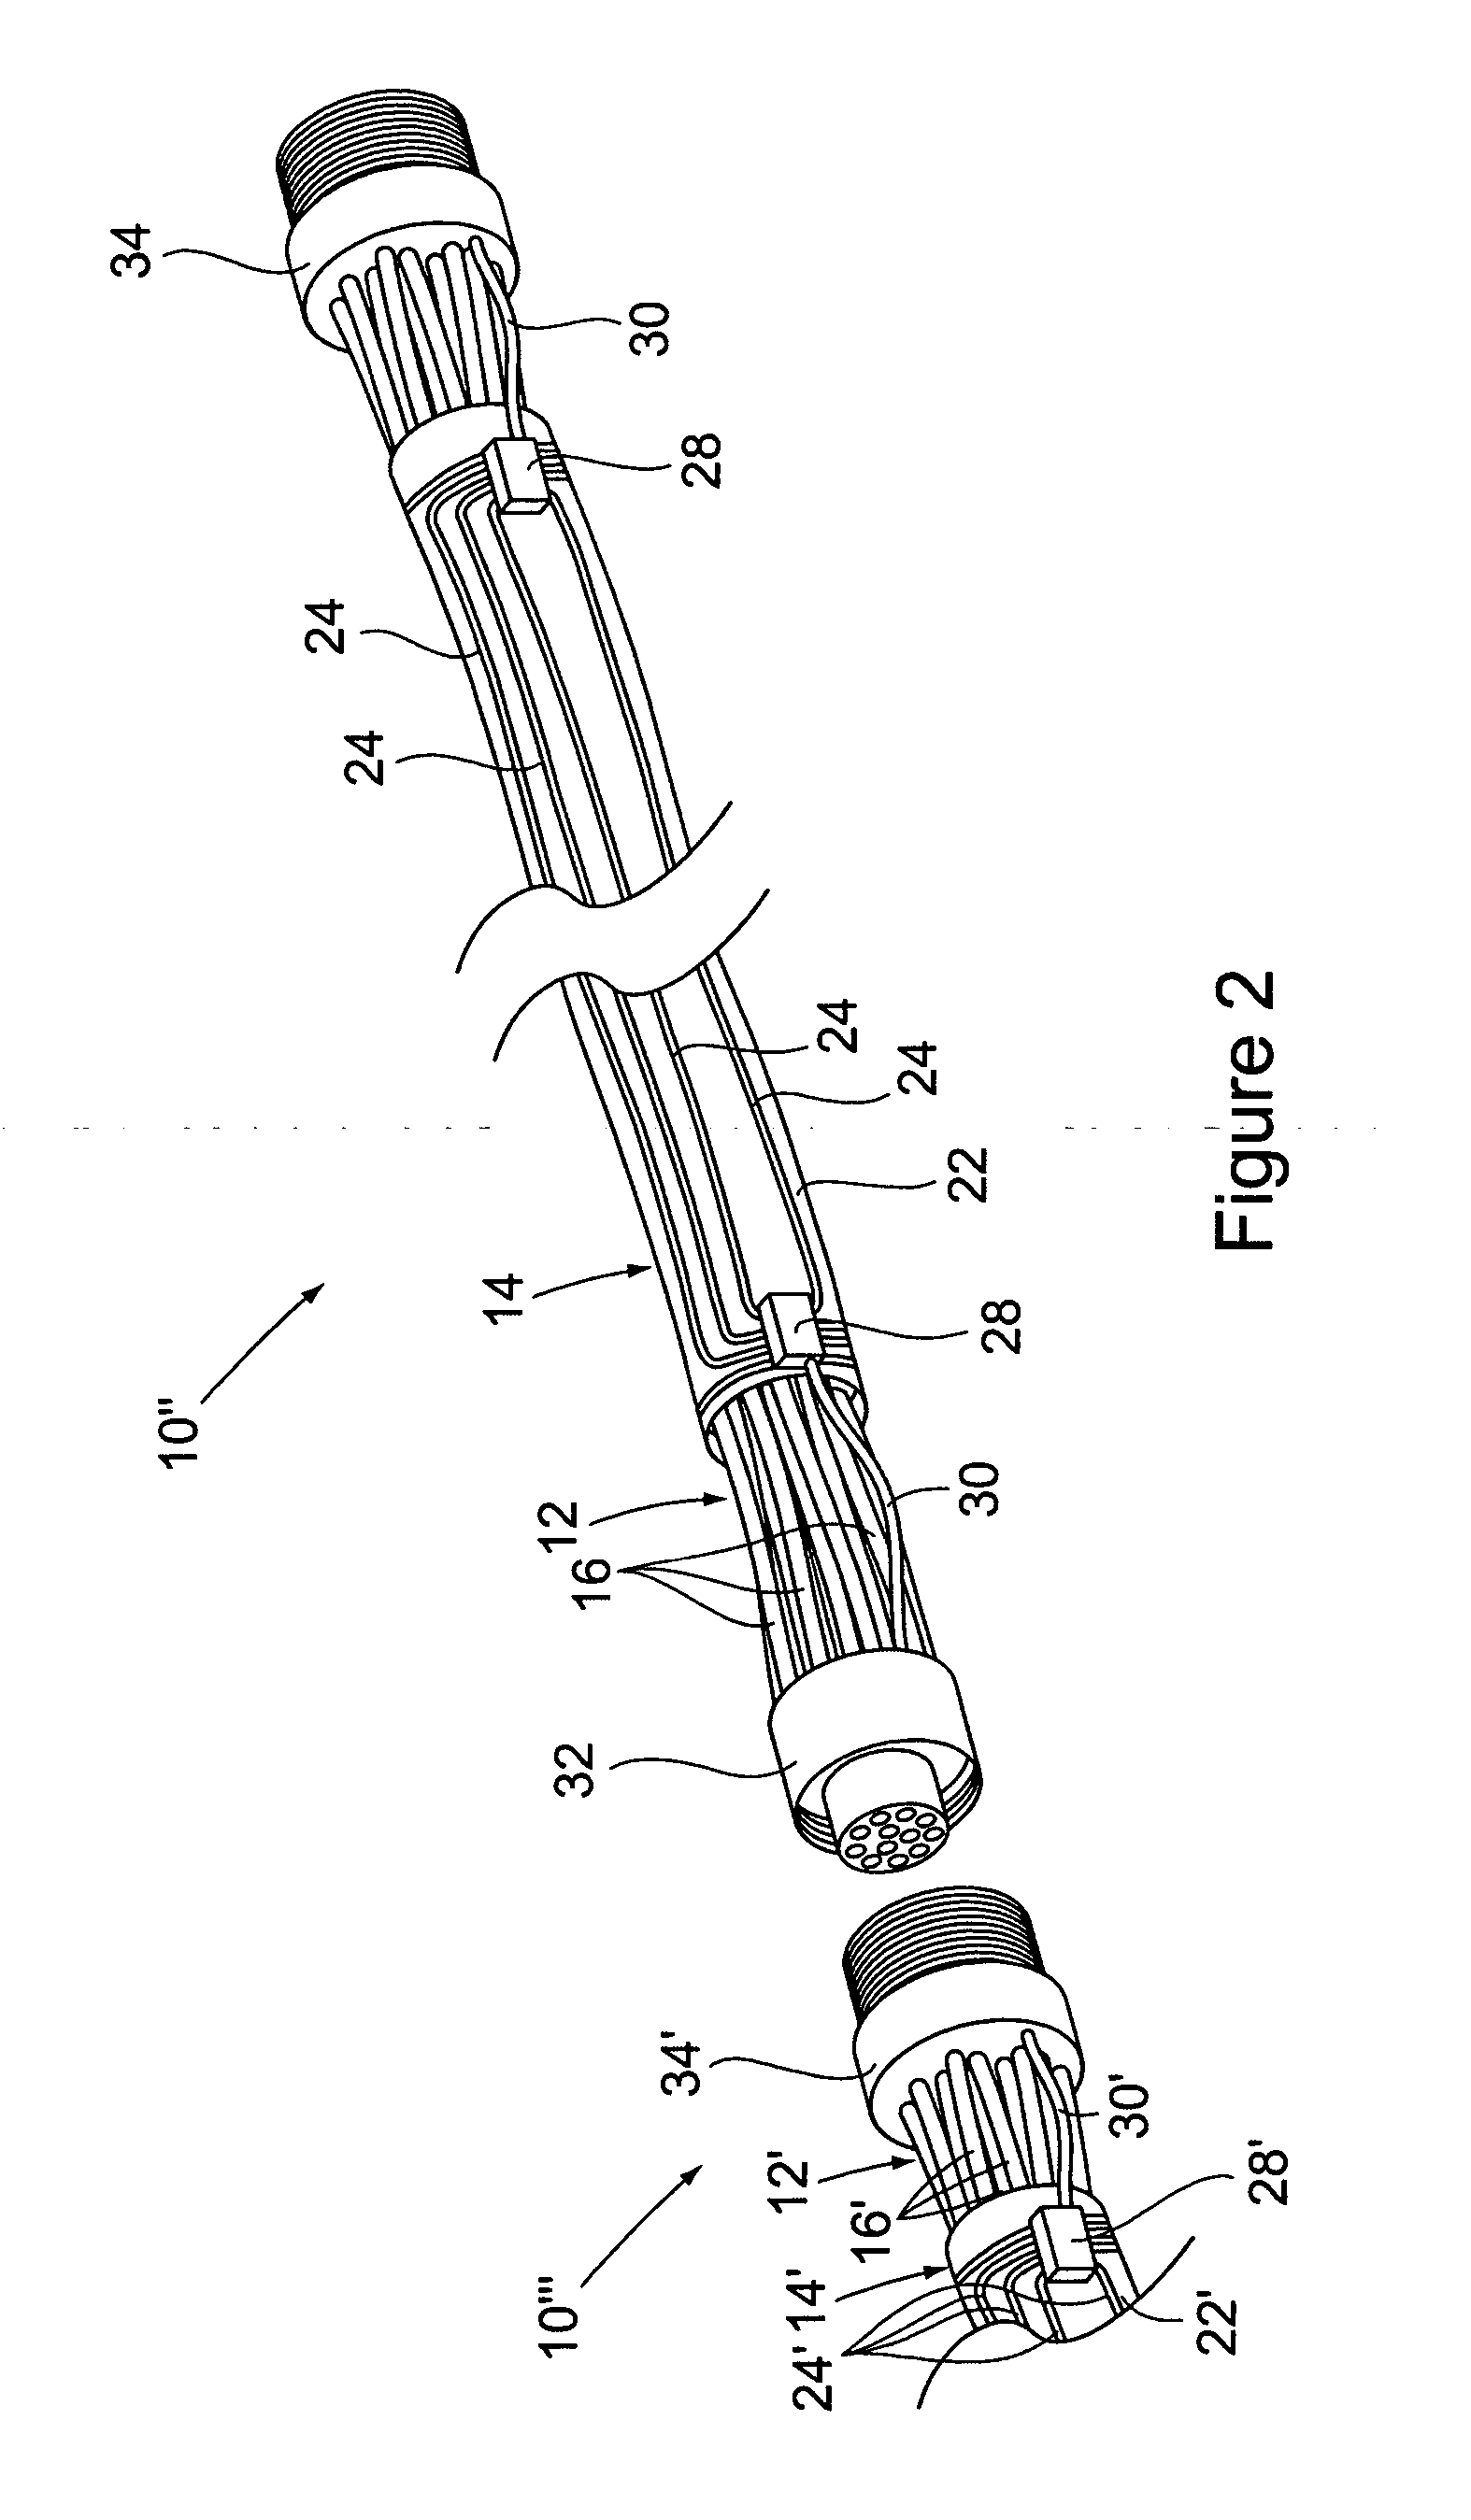 Apparatus and method for monitoring electrical cable chafing via optical waveguides